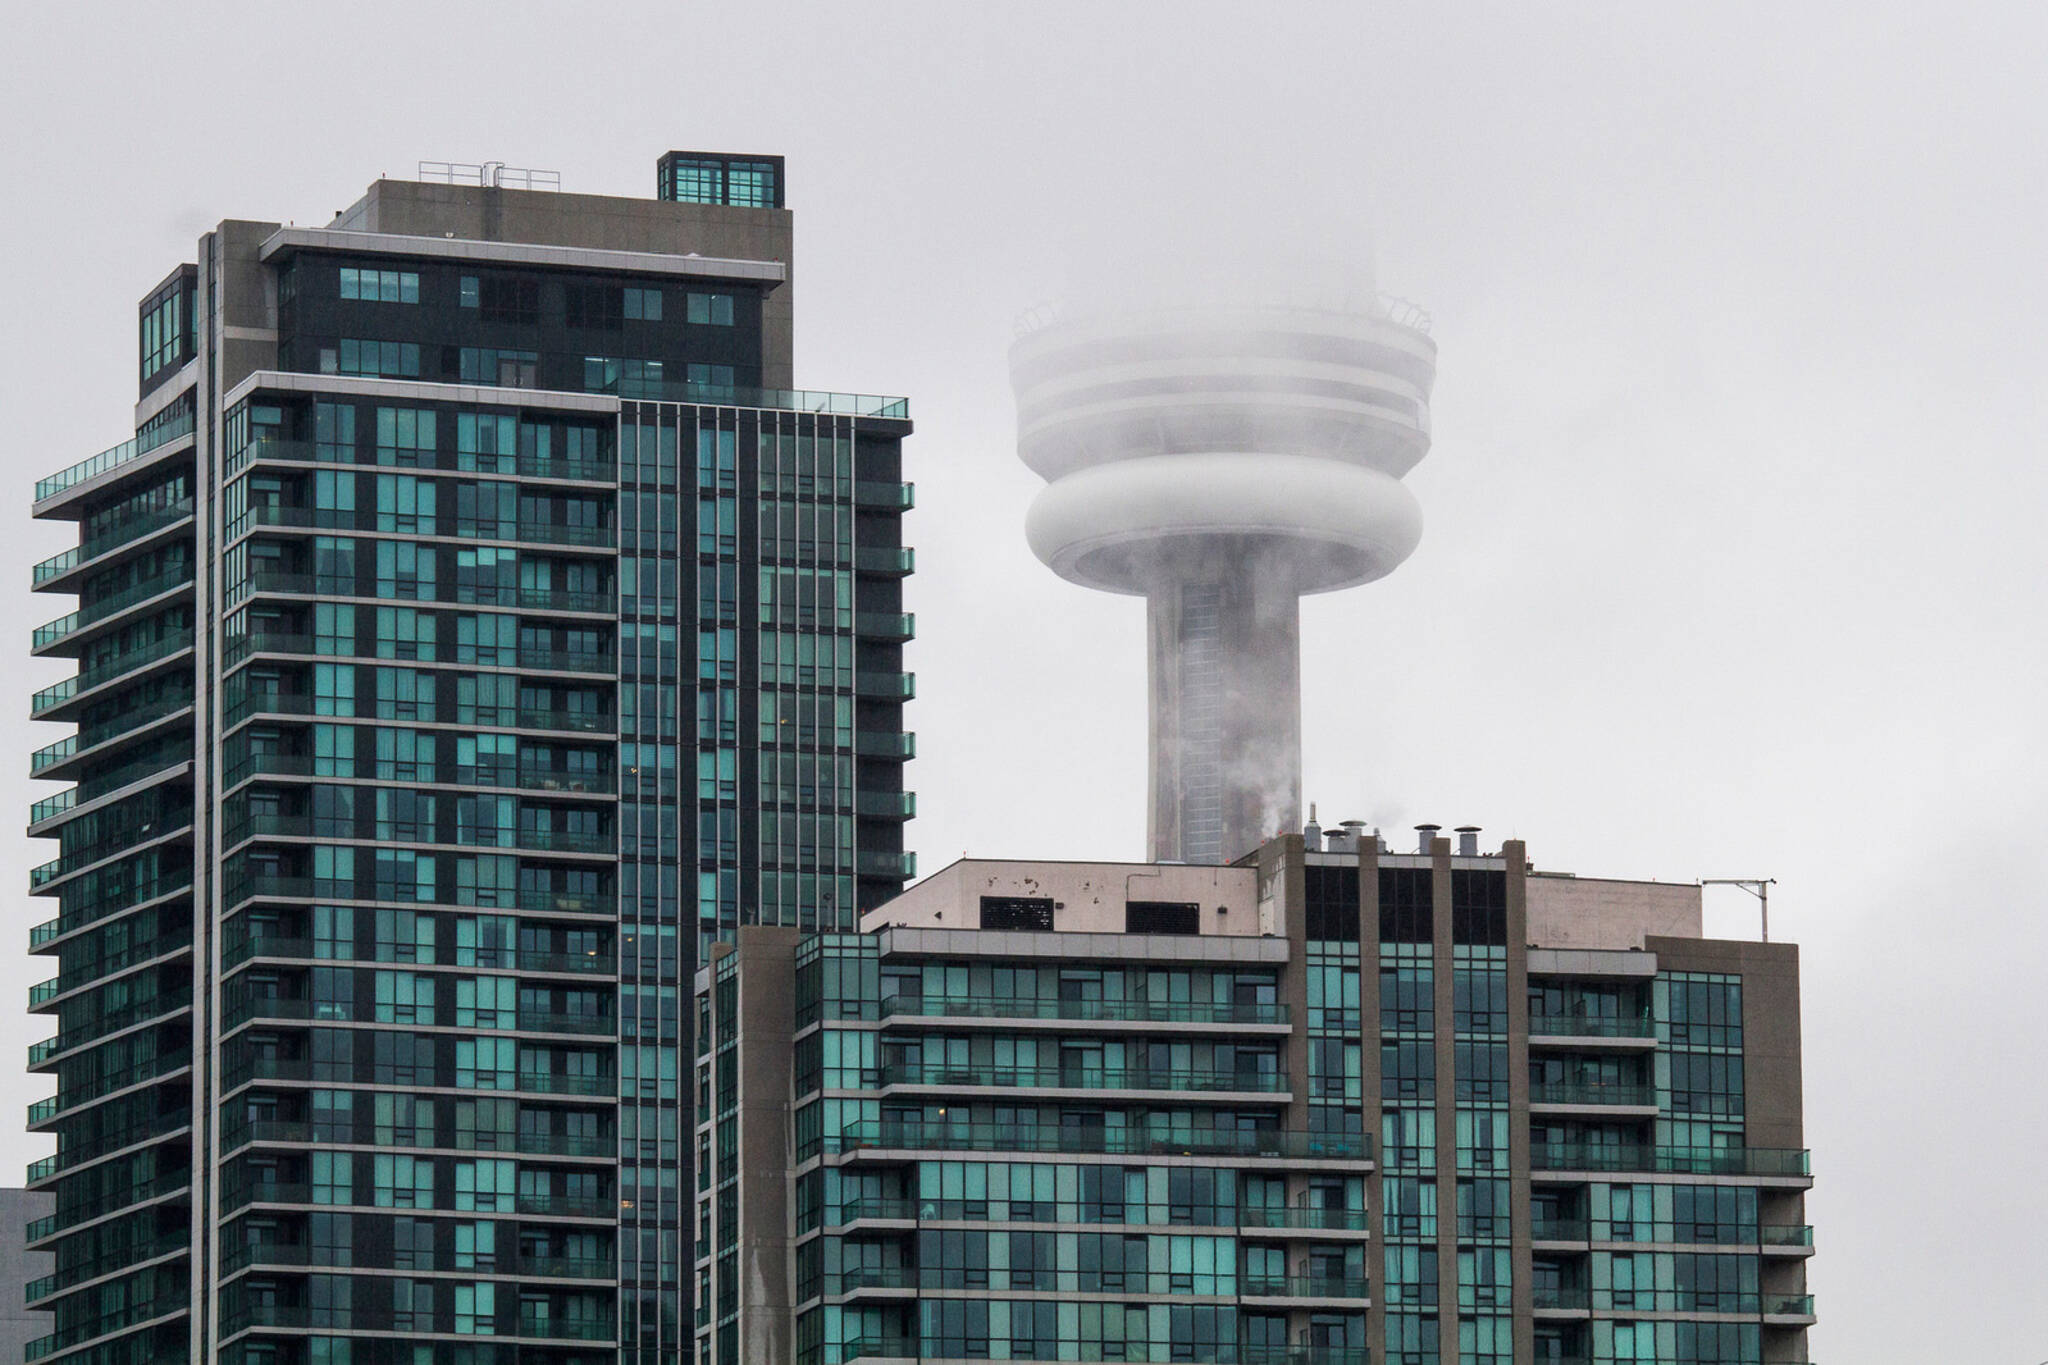 Average Cost Of A One Bedroom Rental In Toronto Hits 2 000